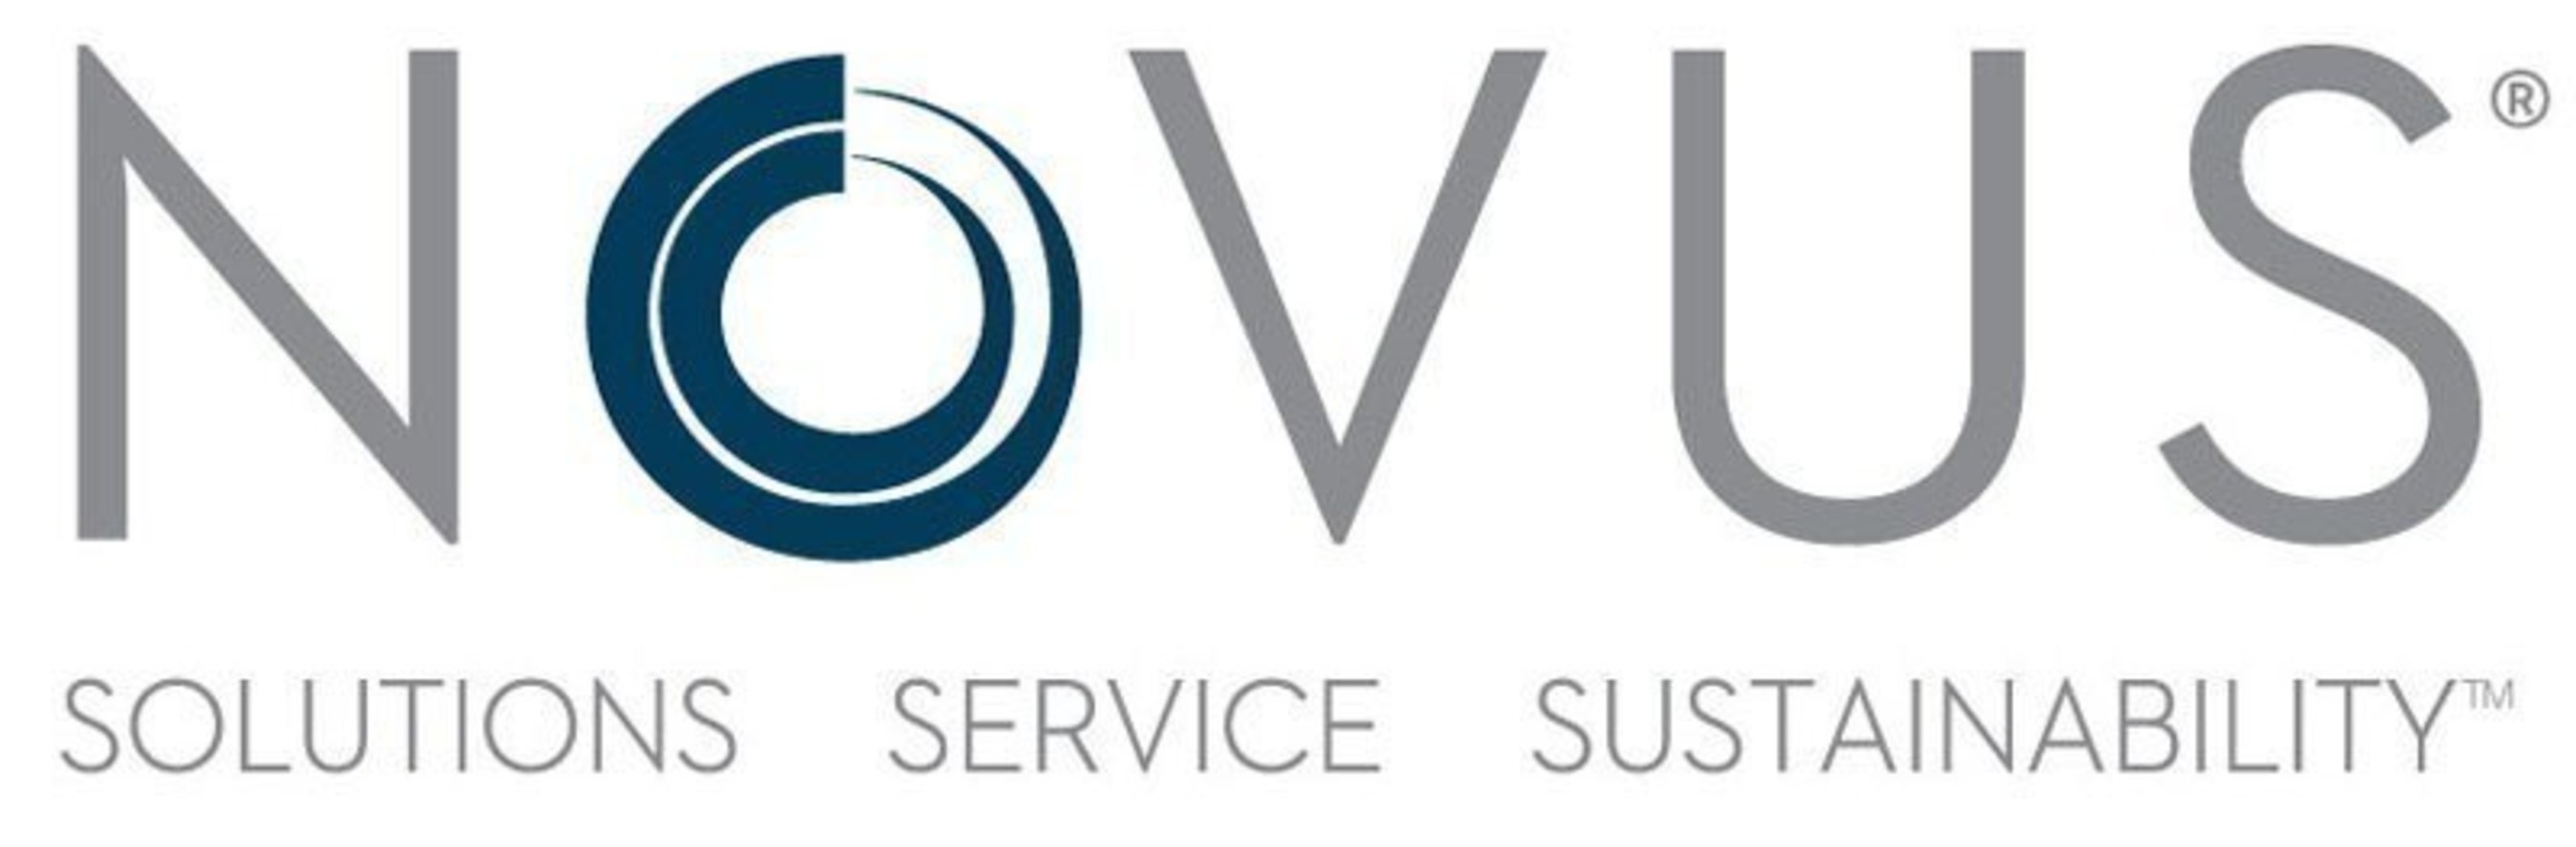 Novus Publishes Sustainability Advancements in Eighth Annual Report